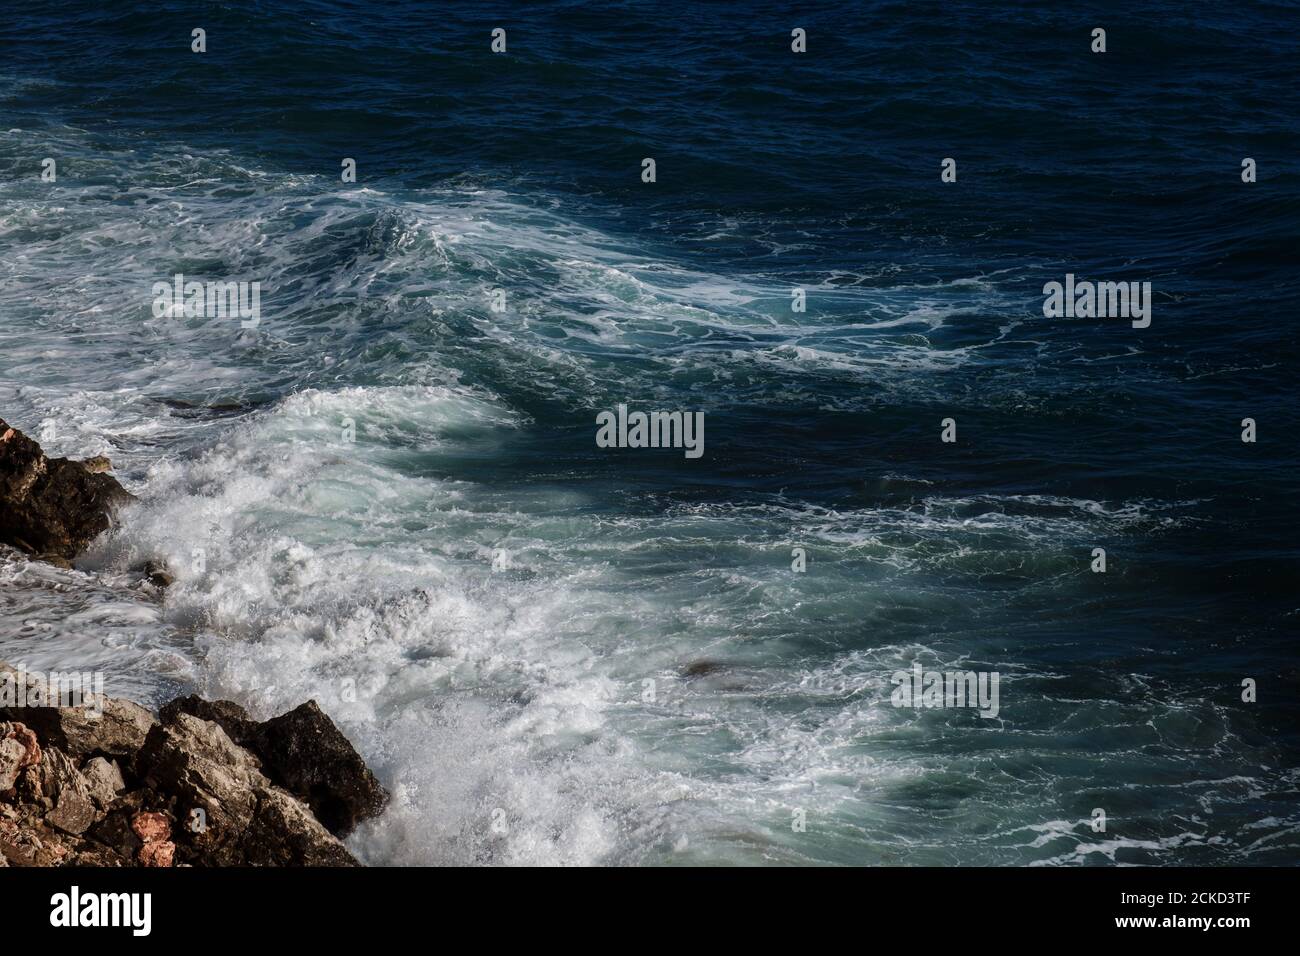 Ocean Wave Background Breaking Sea Water Rocky Shore Rough Seas Turquoise Water Gradient Foam Big Waves At Open Sea Summer Monsoon White Crest Of A Stock Photo Alamy